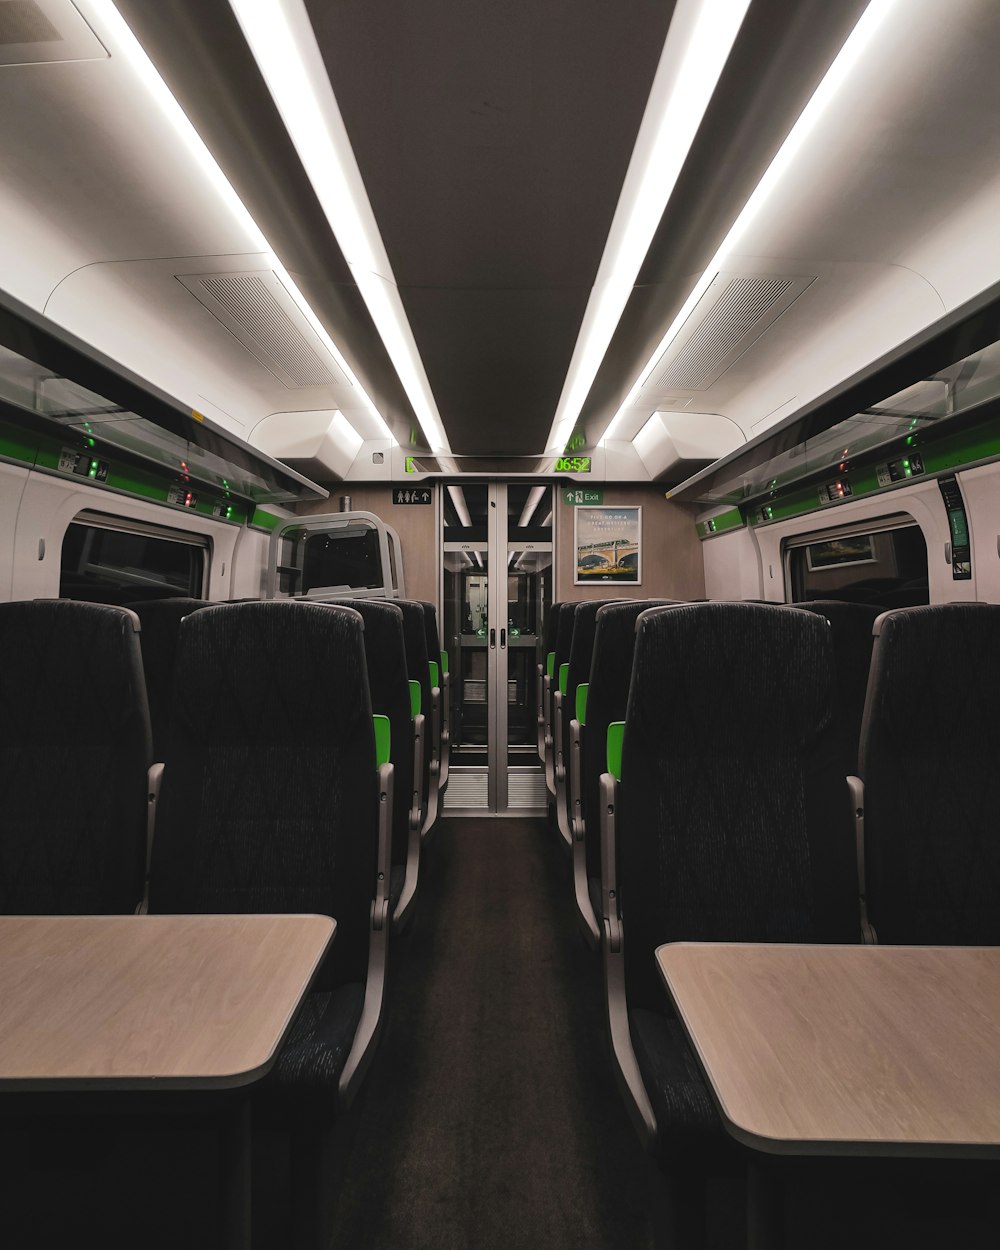 a view of the inside of a commuter train